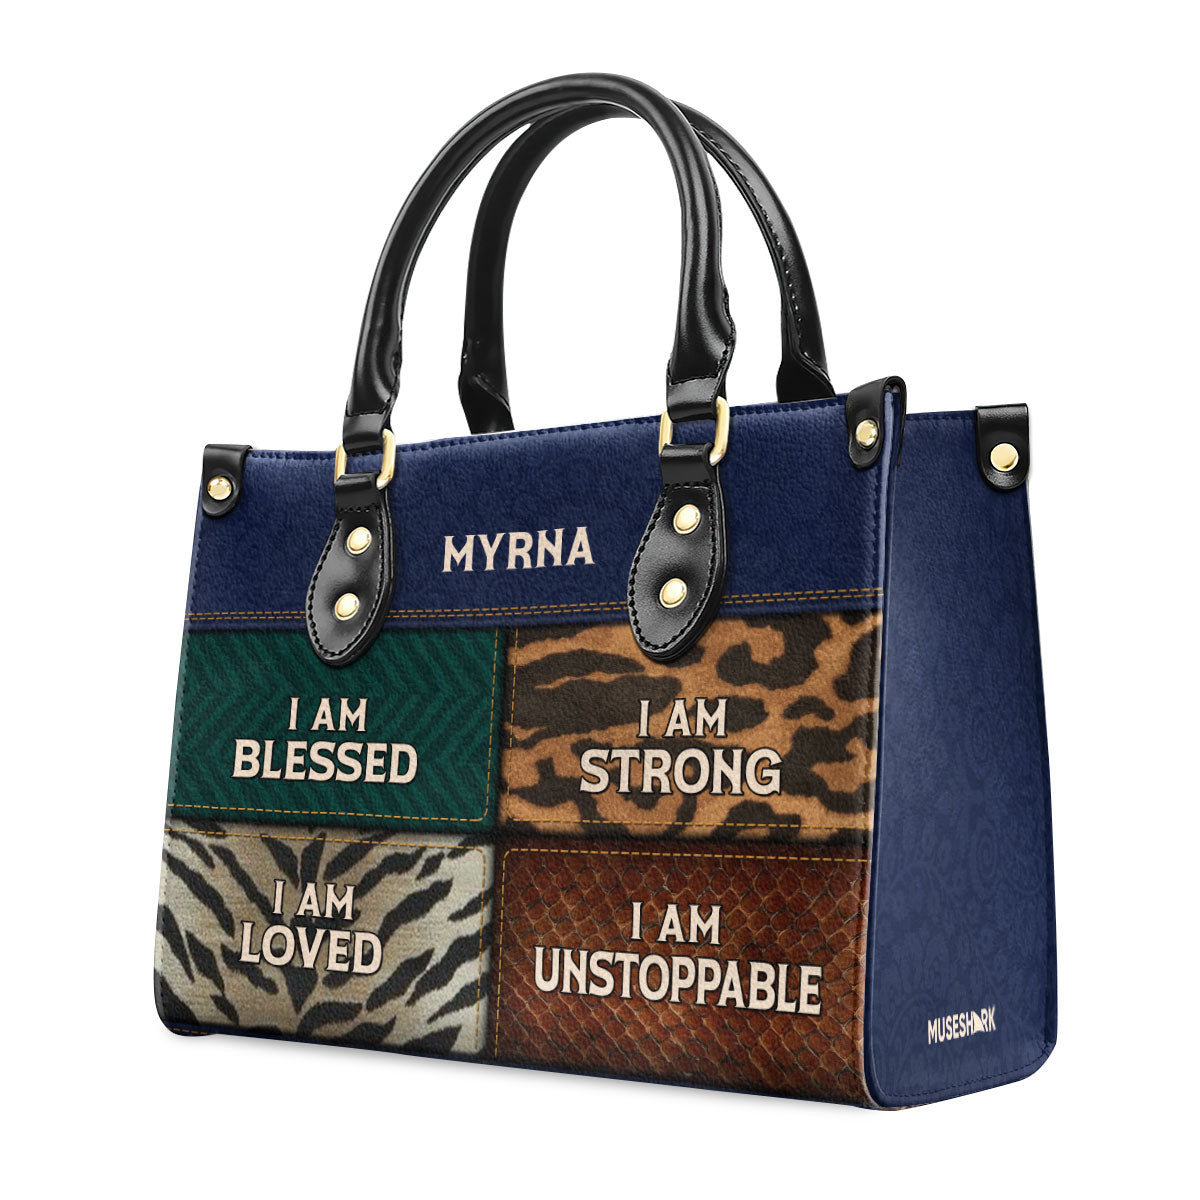 I Am Unstoppable - Personalized Leather Handbag MS06